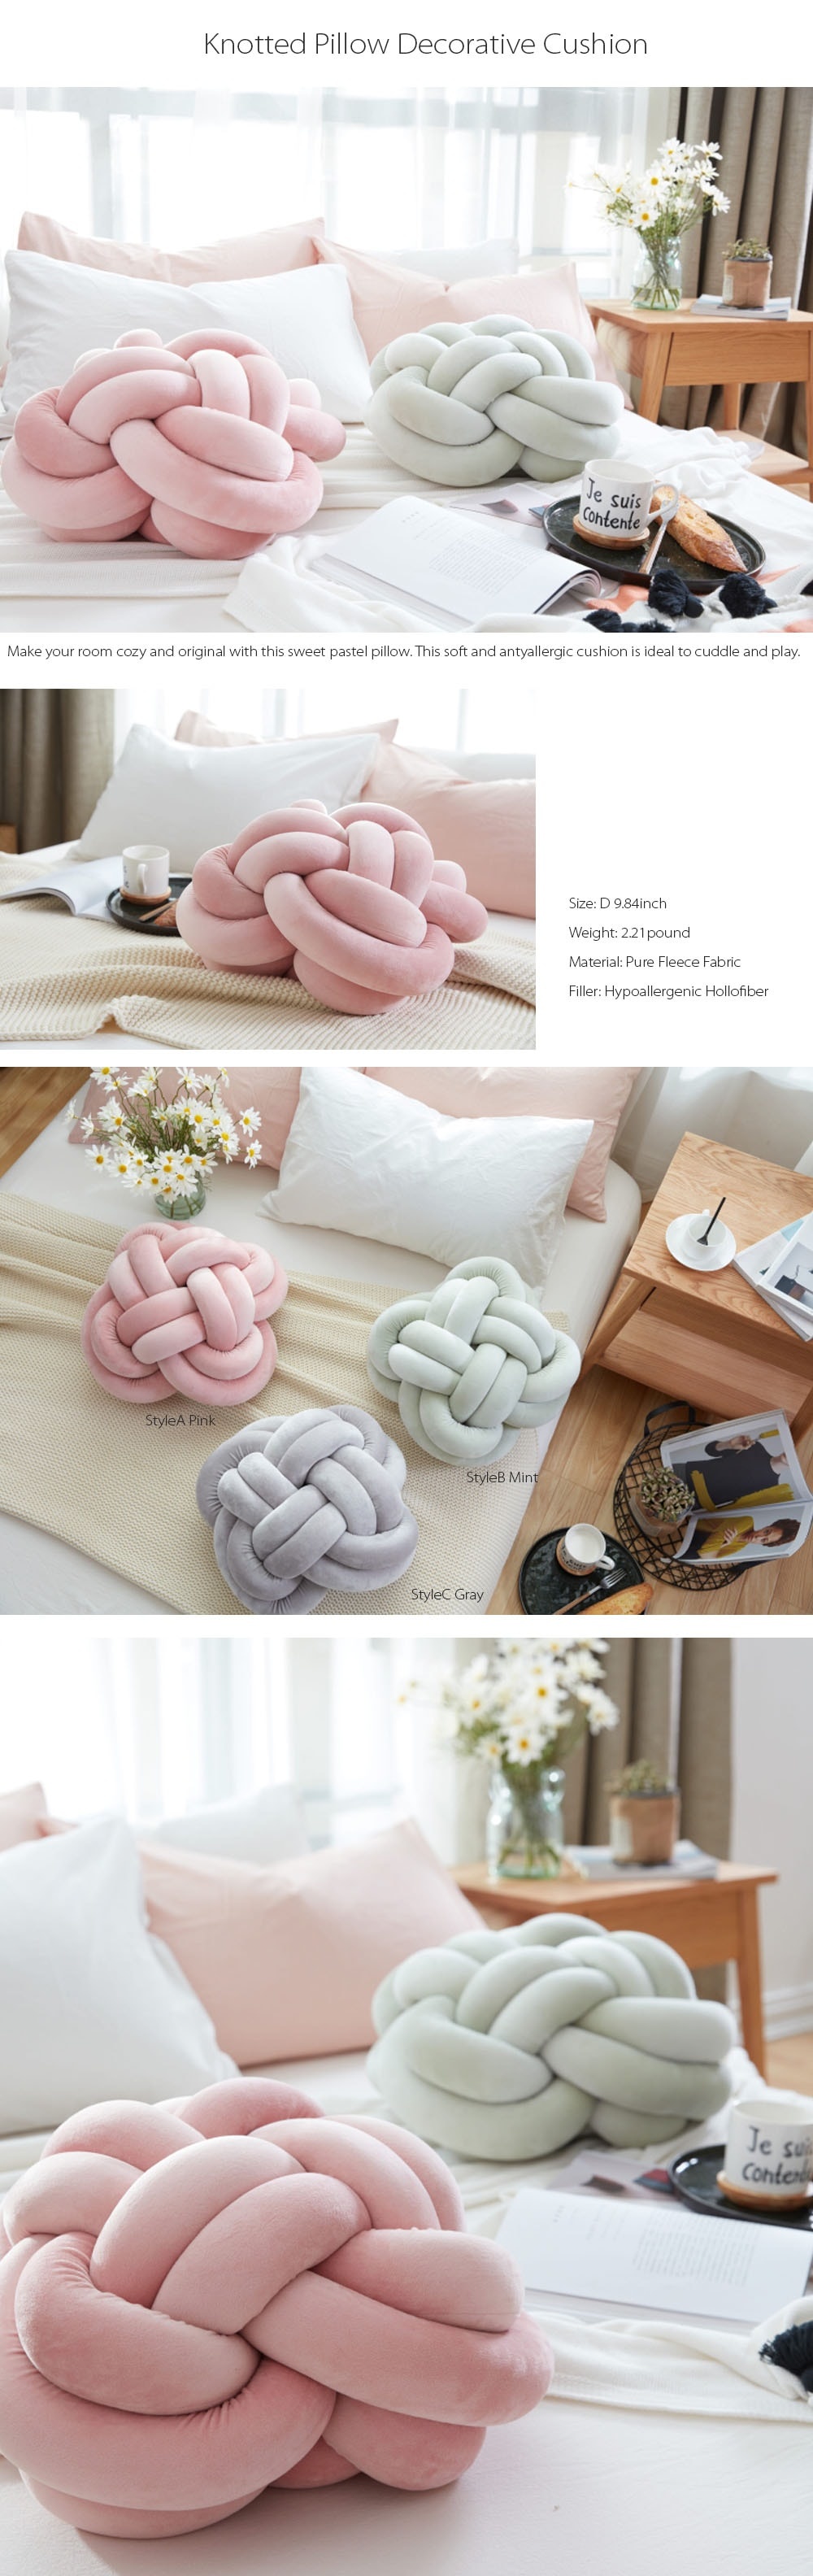 Knot Ball Chunky Pillow Cushion Long Throw Knitted Cute Baby Bed Home Decor New 